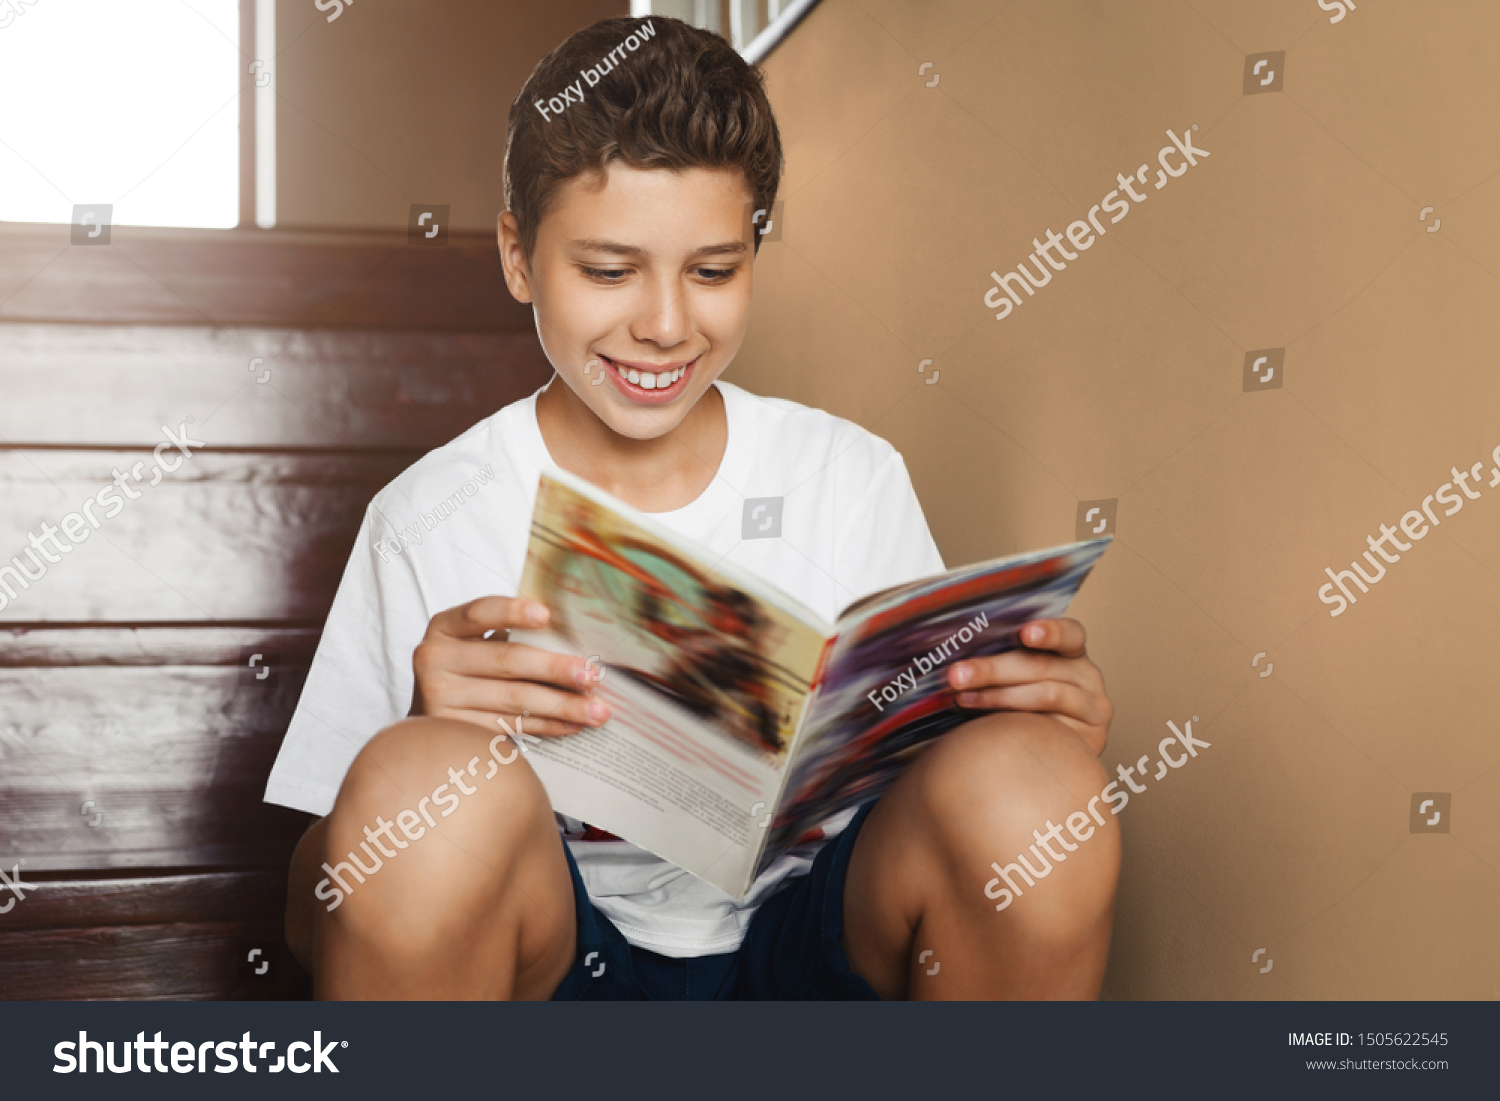 Smiling attractive teen boy sitting at home on steps and reading magazine. Cheerful guy in white t-shirt is sitting at home, reading comic book. Schoolboy is reading paper book while resting home. #1505622545